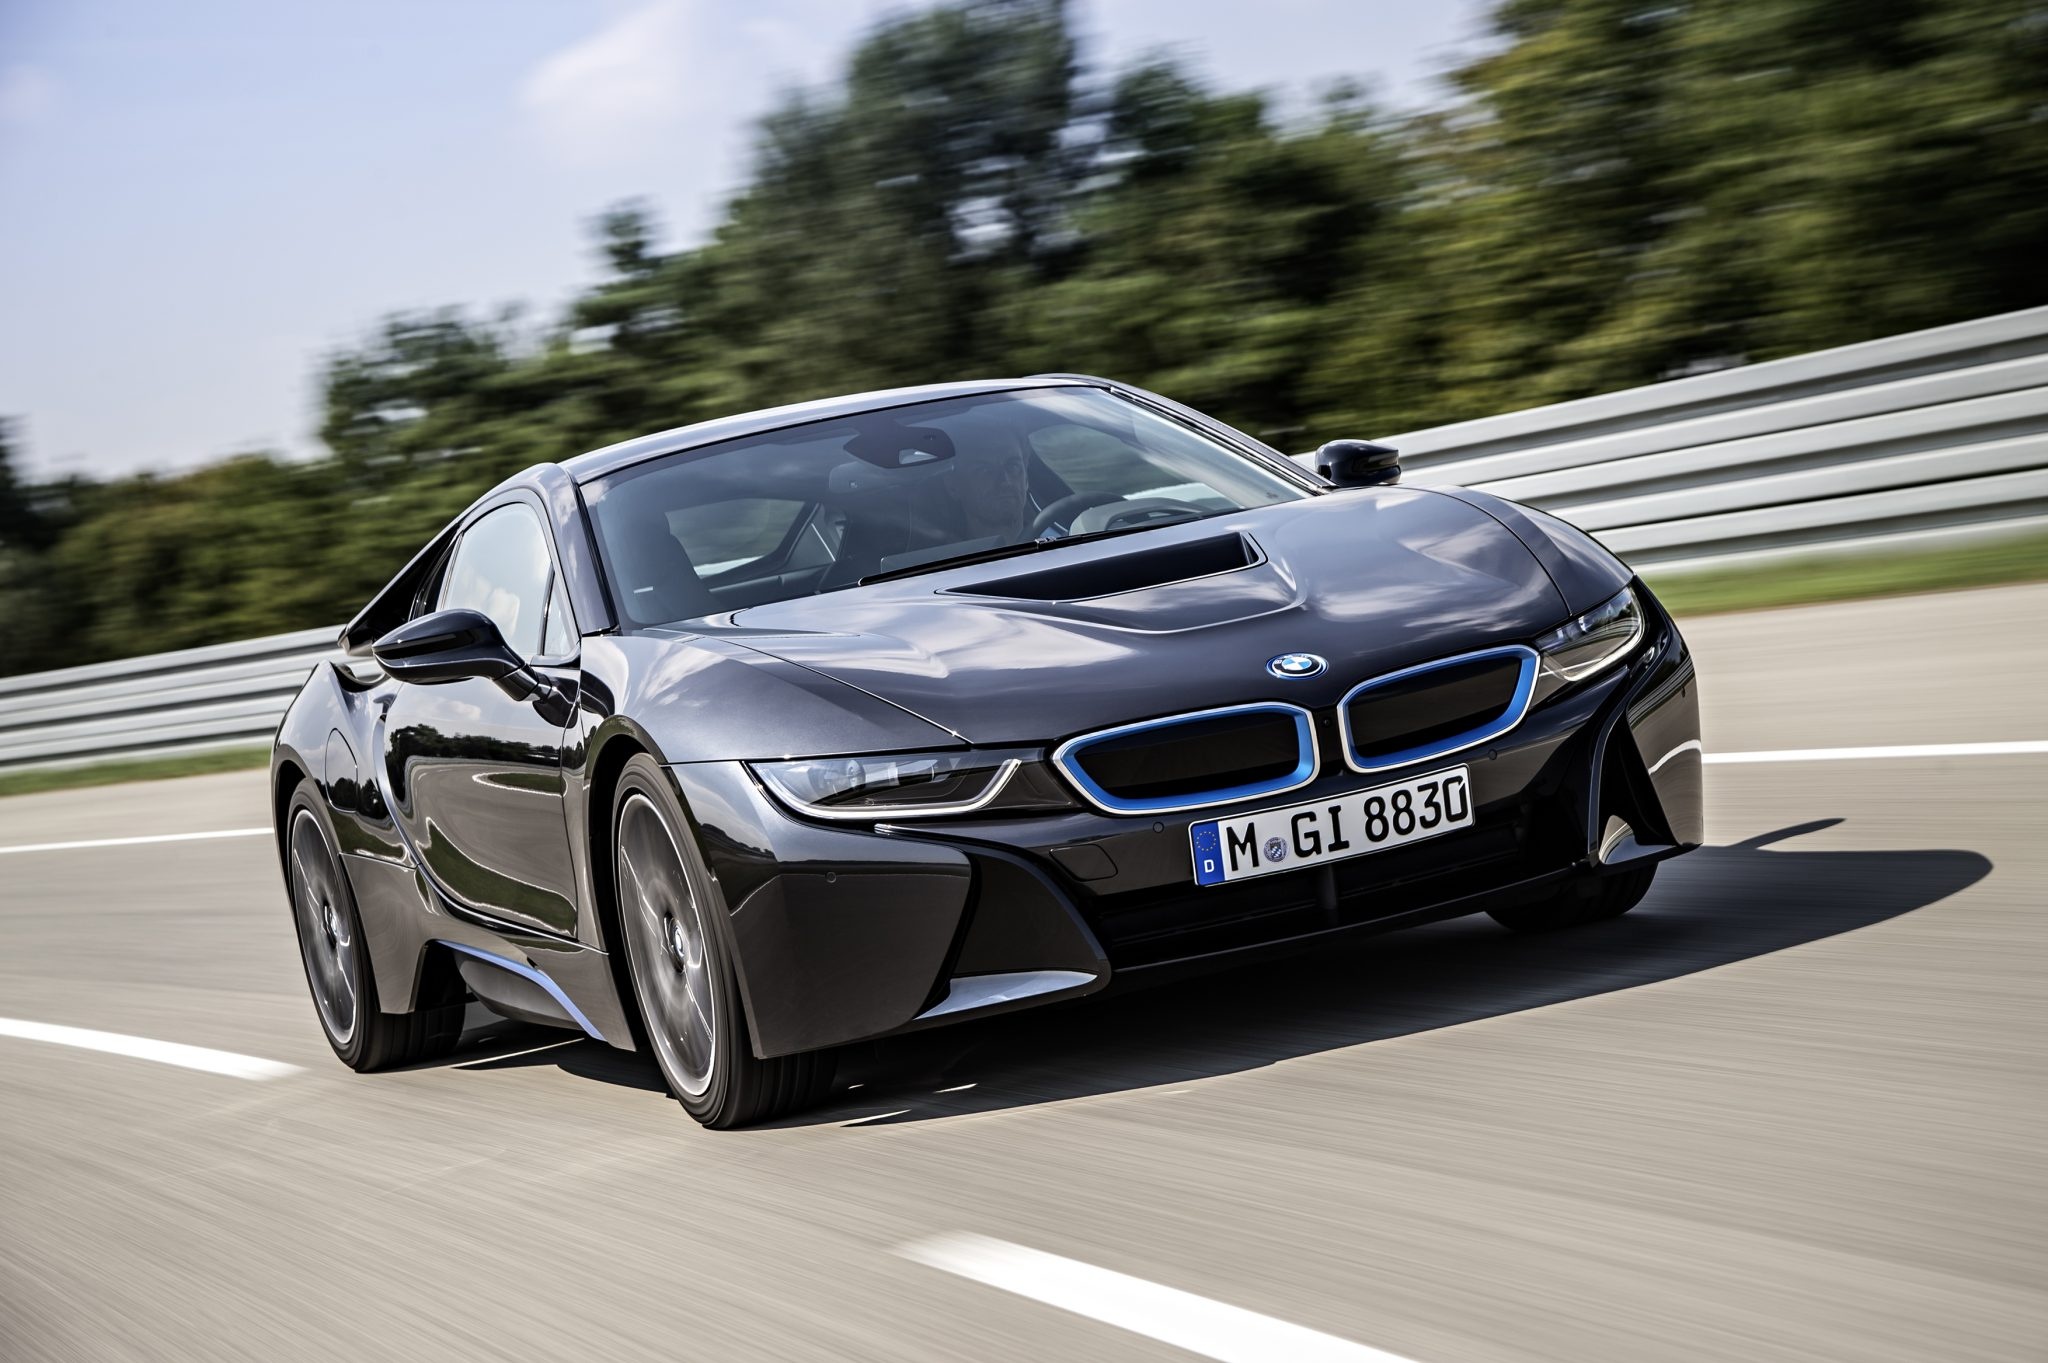 BMW i8, Supercar silhouette, Power and elegance, Iconic design, Automotive excellence, 2050x1370 HD Desktop